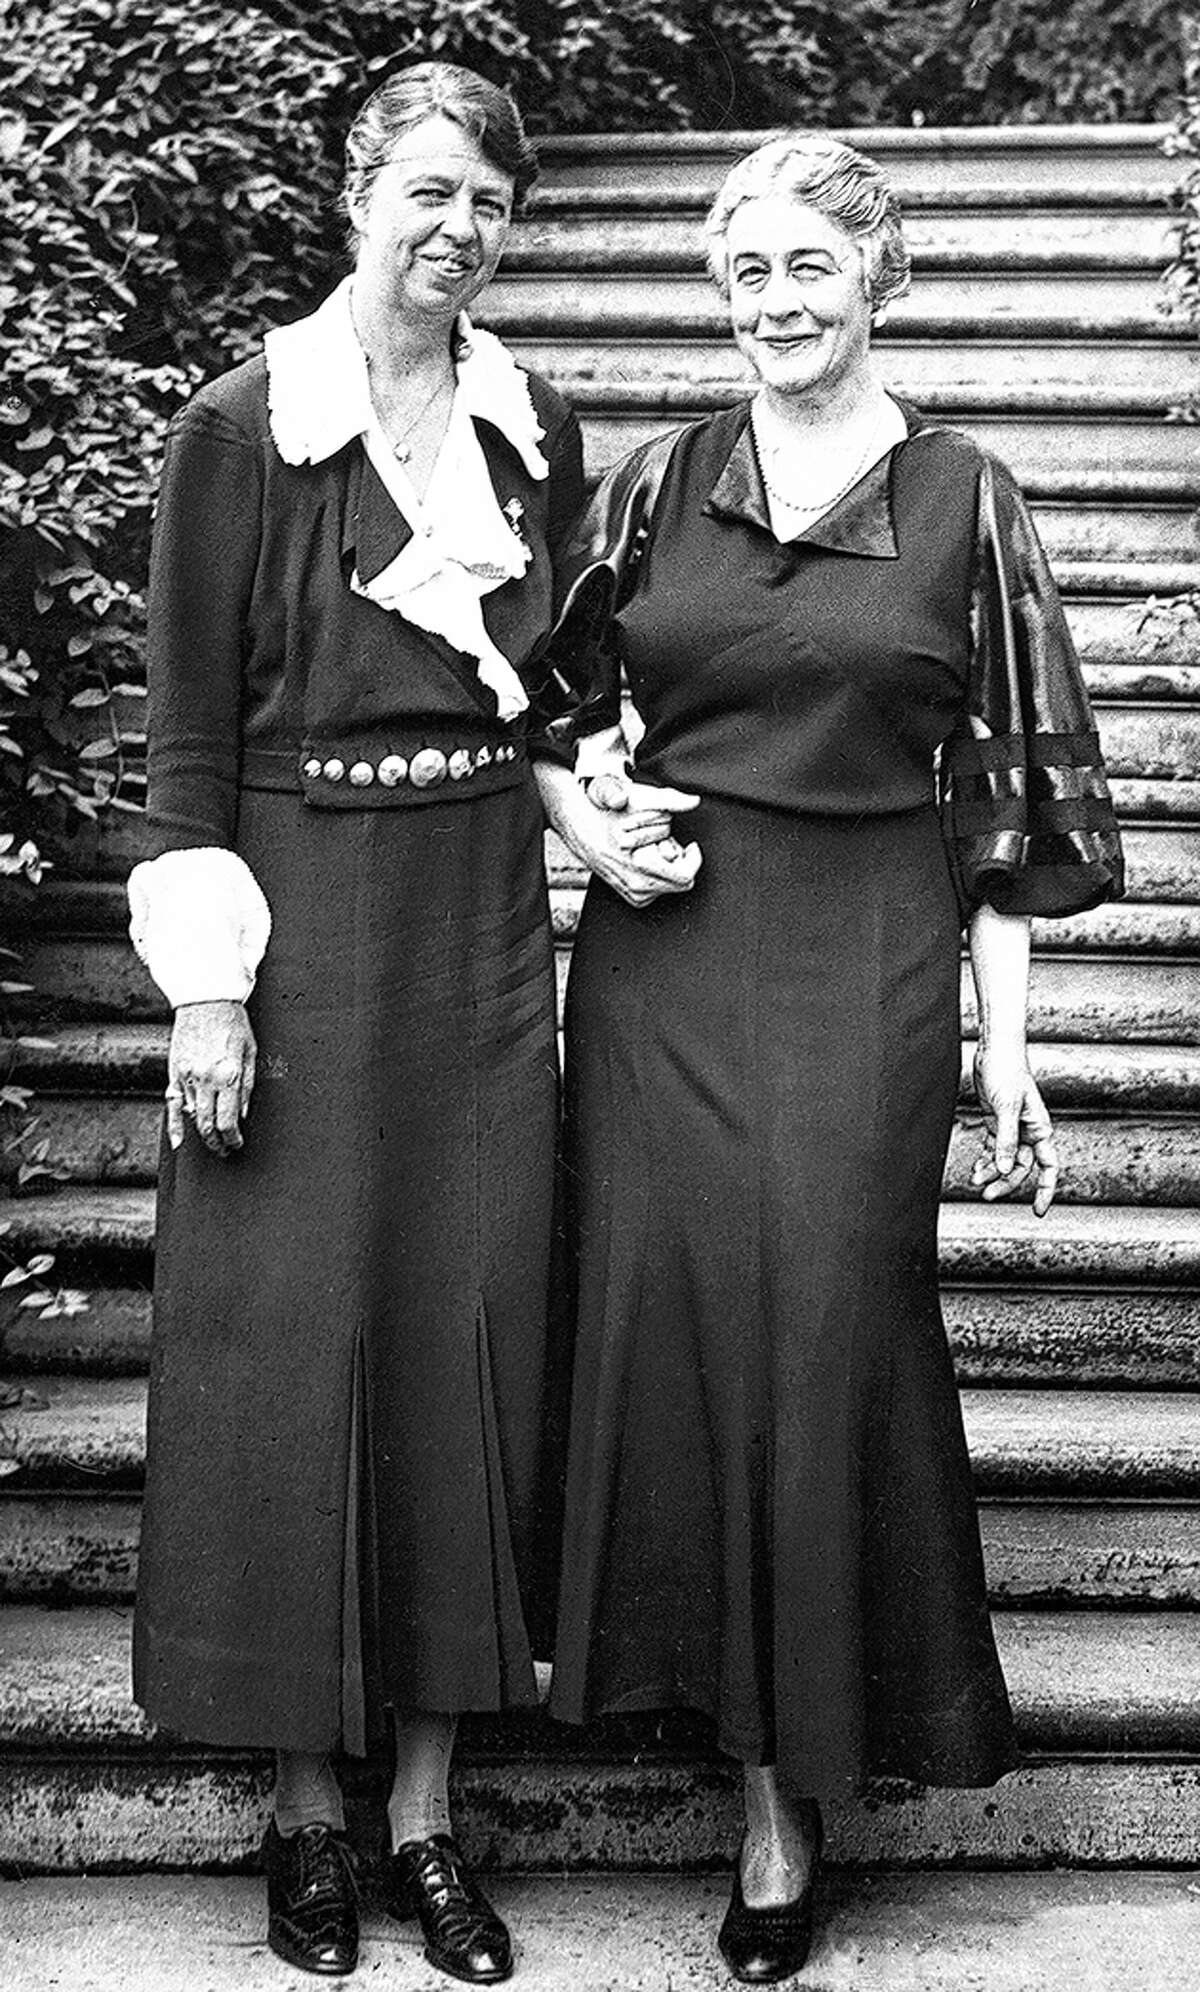 Eleanor Roosevelt is pictured with her house guest, Ruth Bryan Owen, the U.S. minister to Denmark, in October 1934 on the South Grounds of the White House. Owen is the daughter of William Jennings Bryan.